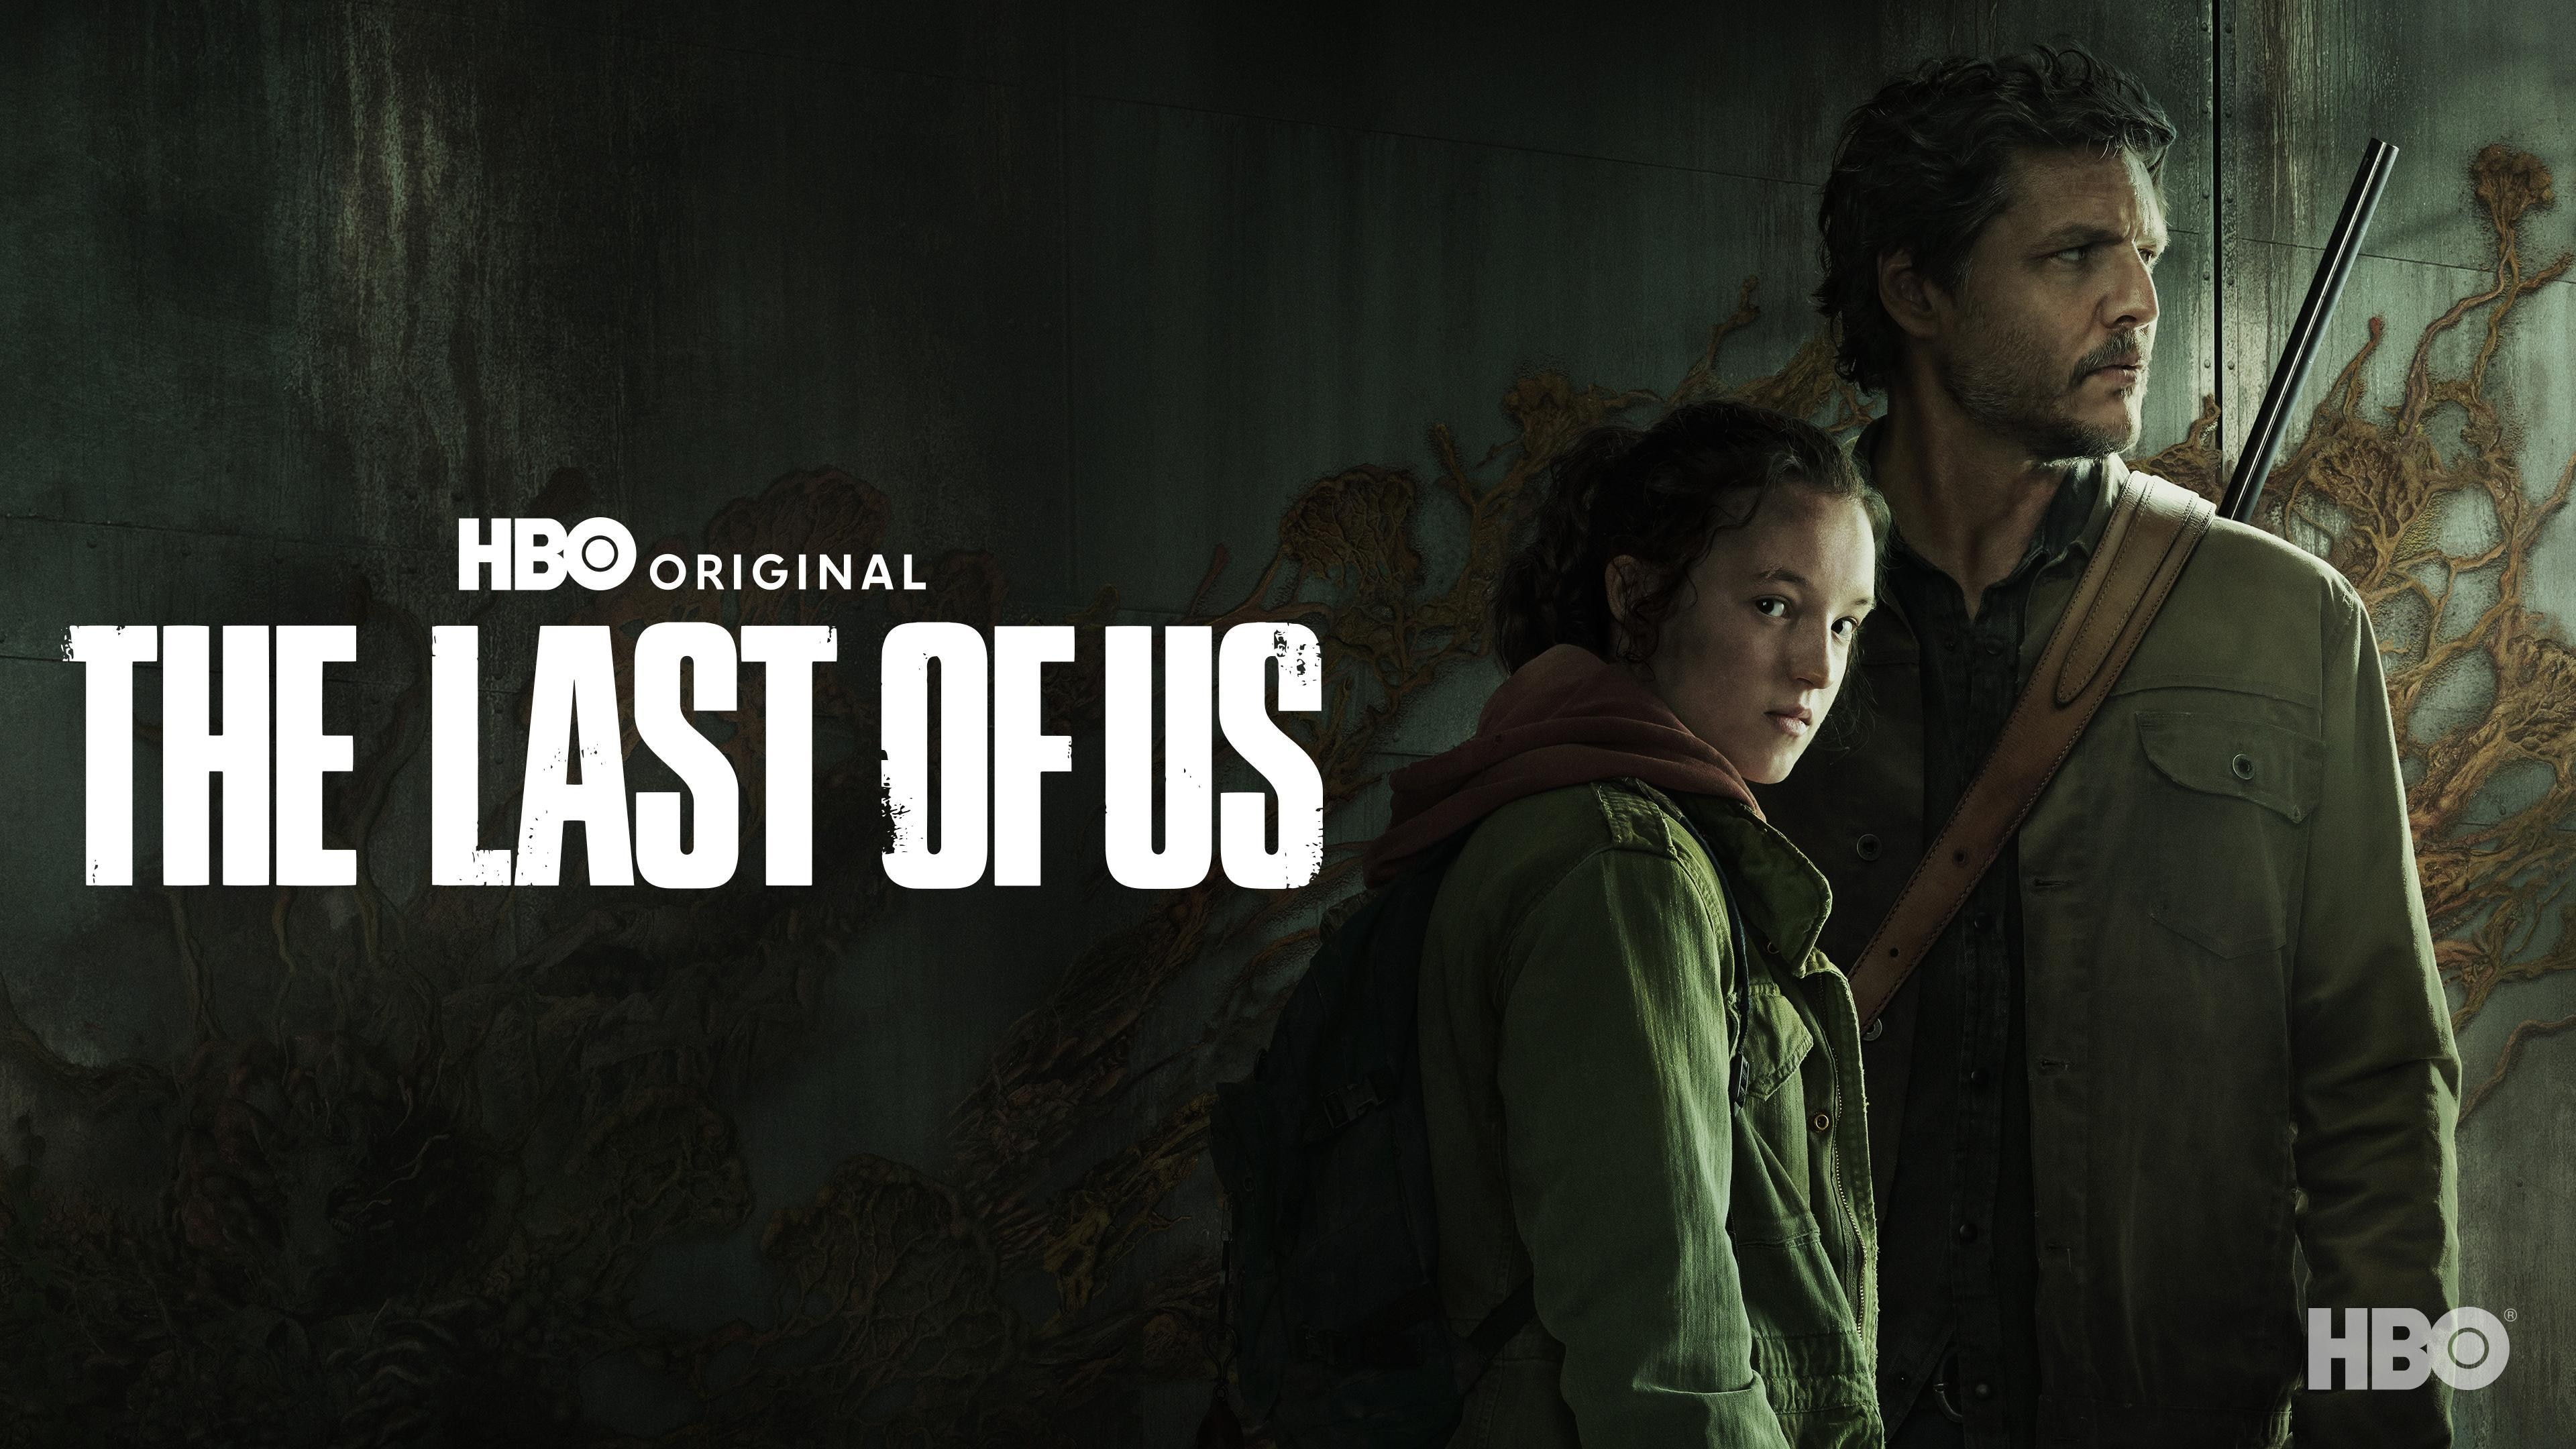 Can You Watch The Last of Us Online for Free via Streaming on HBO